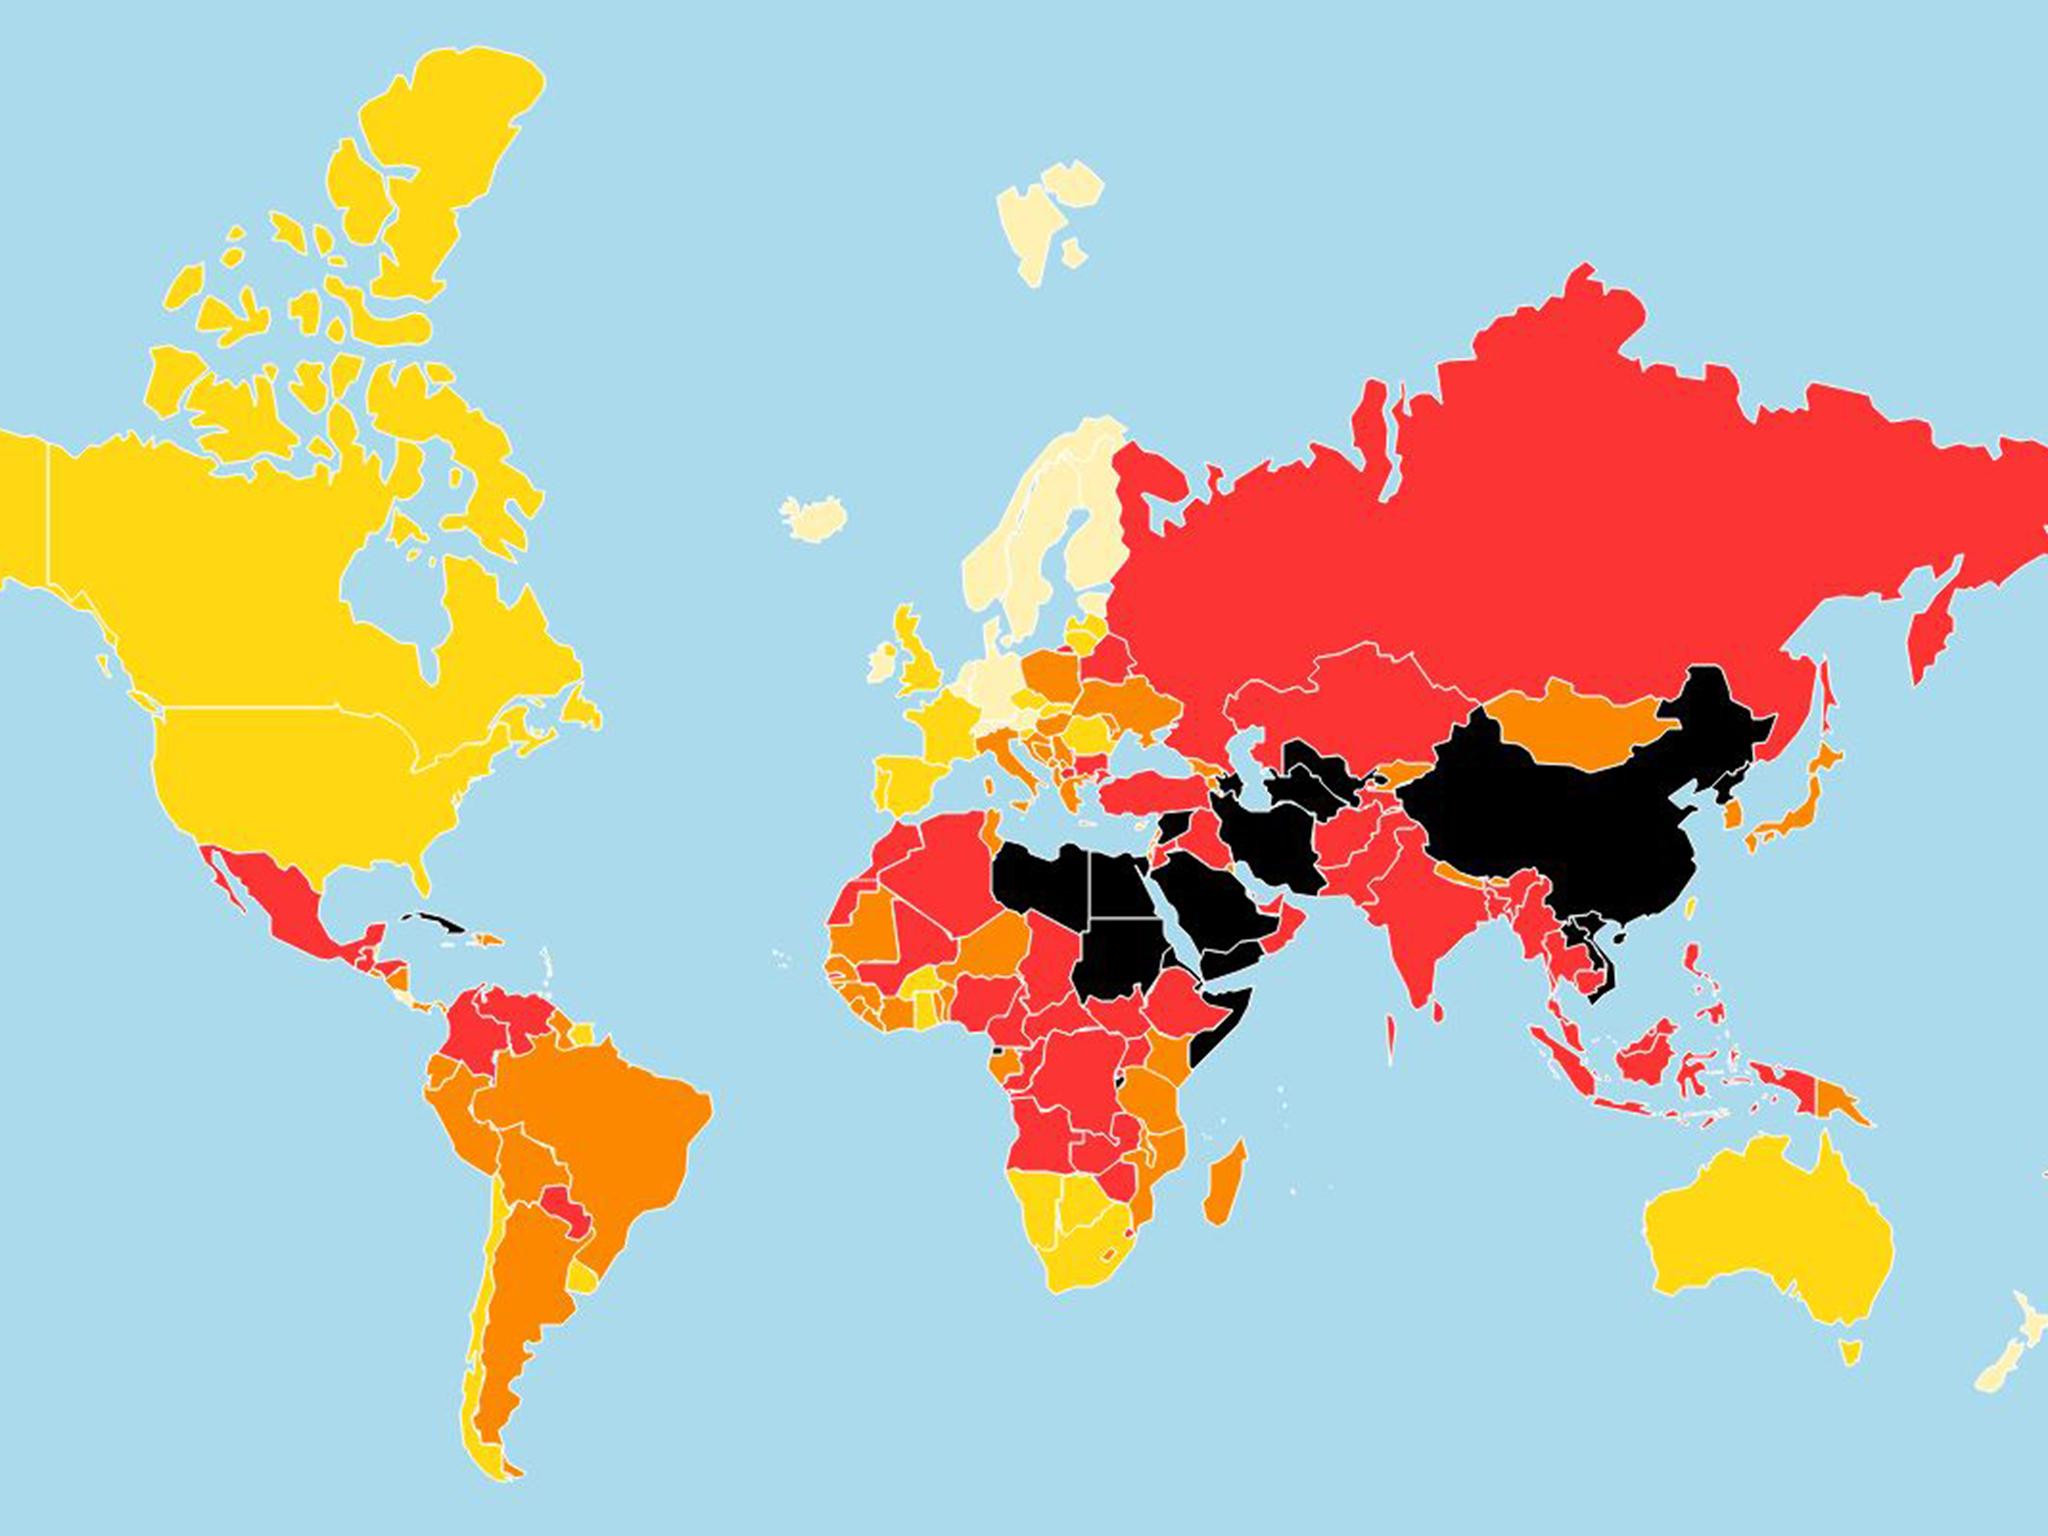 The map shows the countries with the freest press in light yellow and the countries where there is a "very serious situation" regarding freedom of information in black